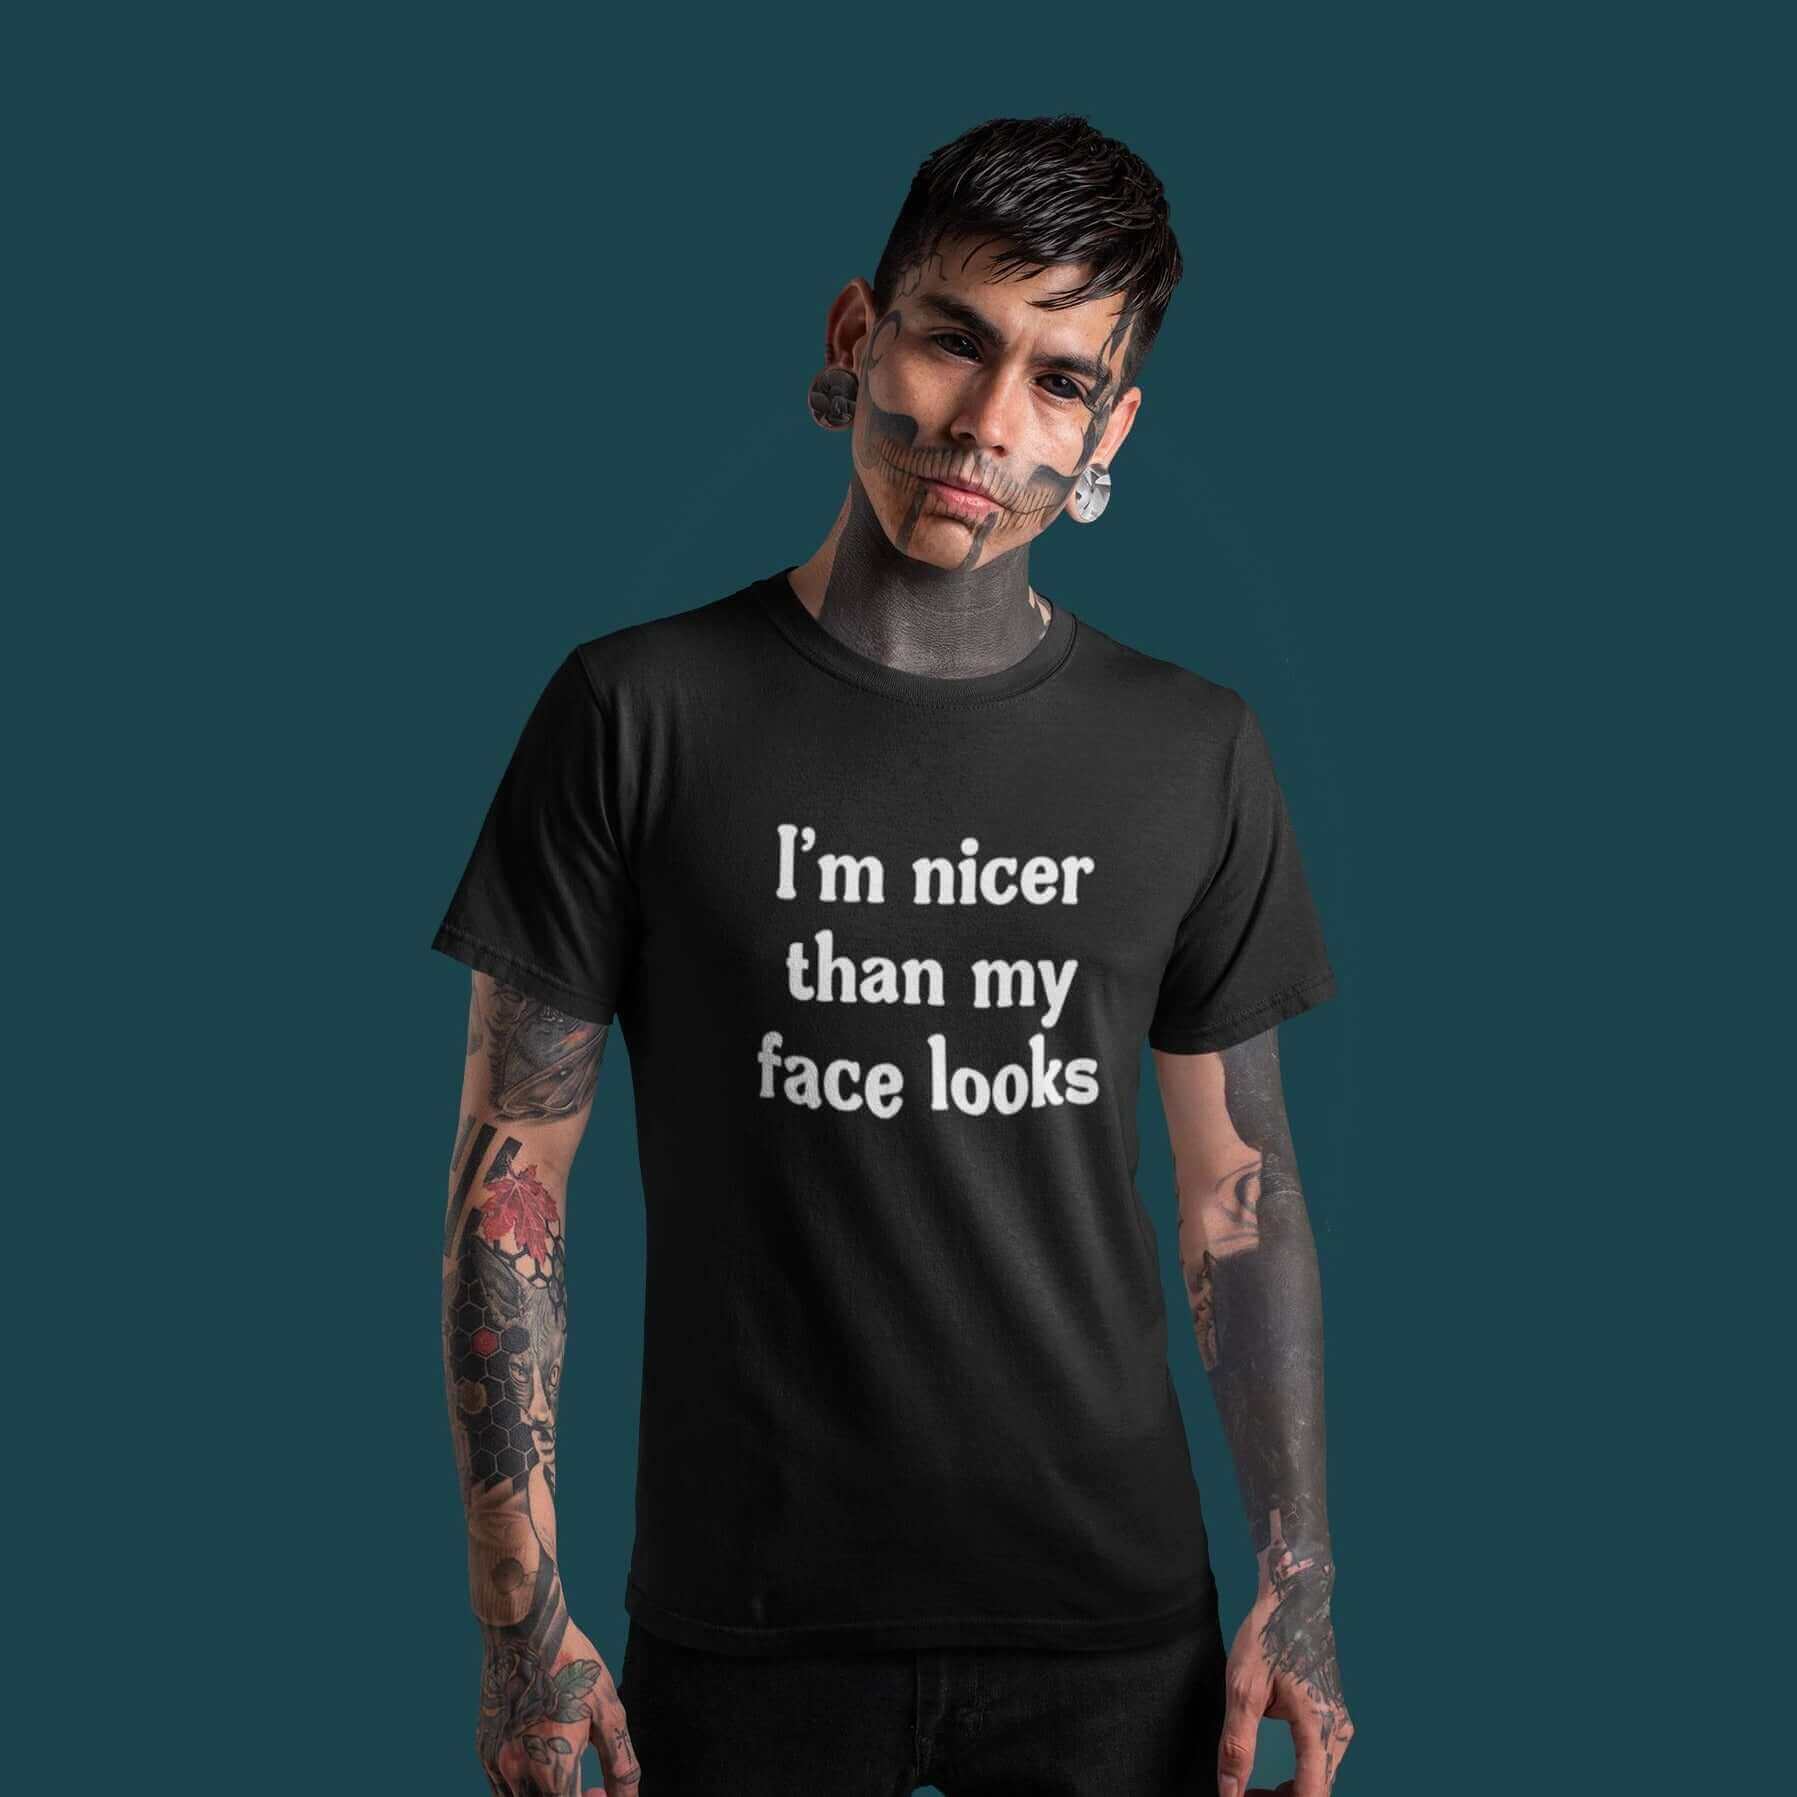 Alternative man with heavily tattooed face wearing black t-shirt that says I'm nicer than my face looks printed on the front.